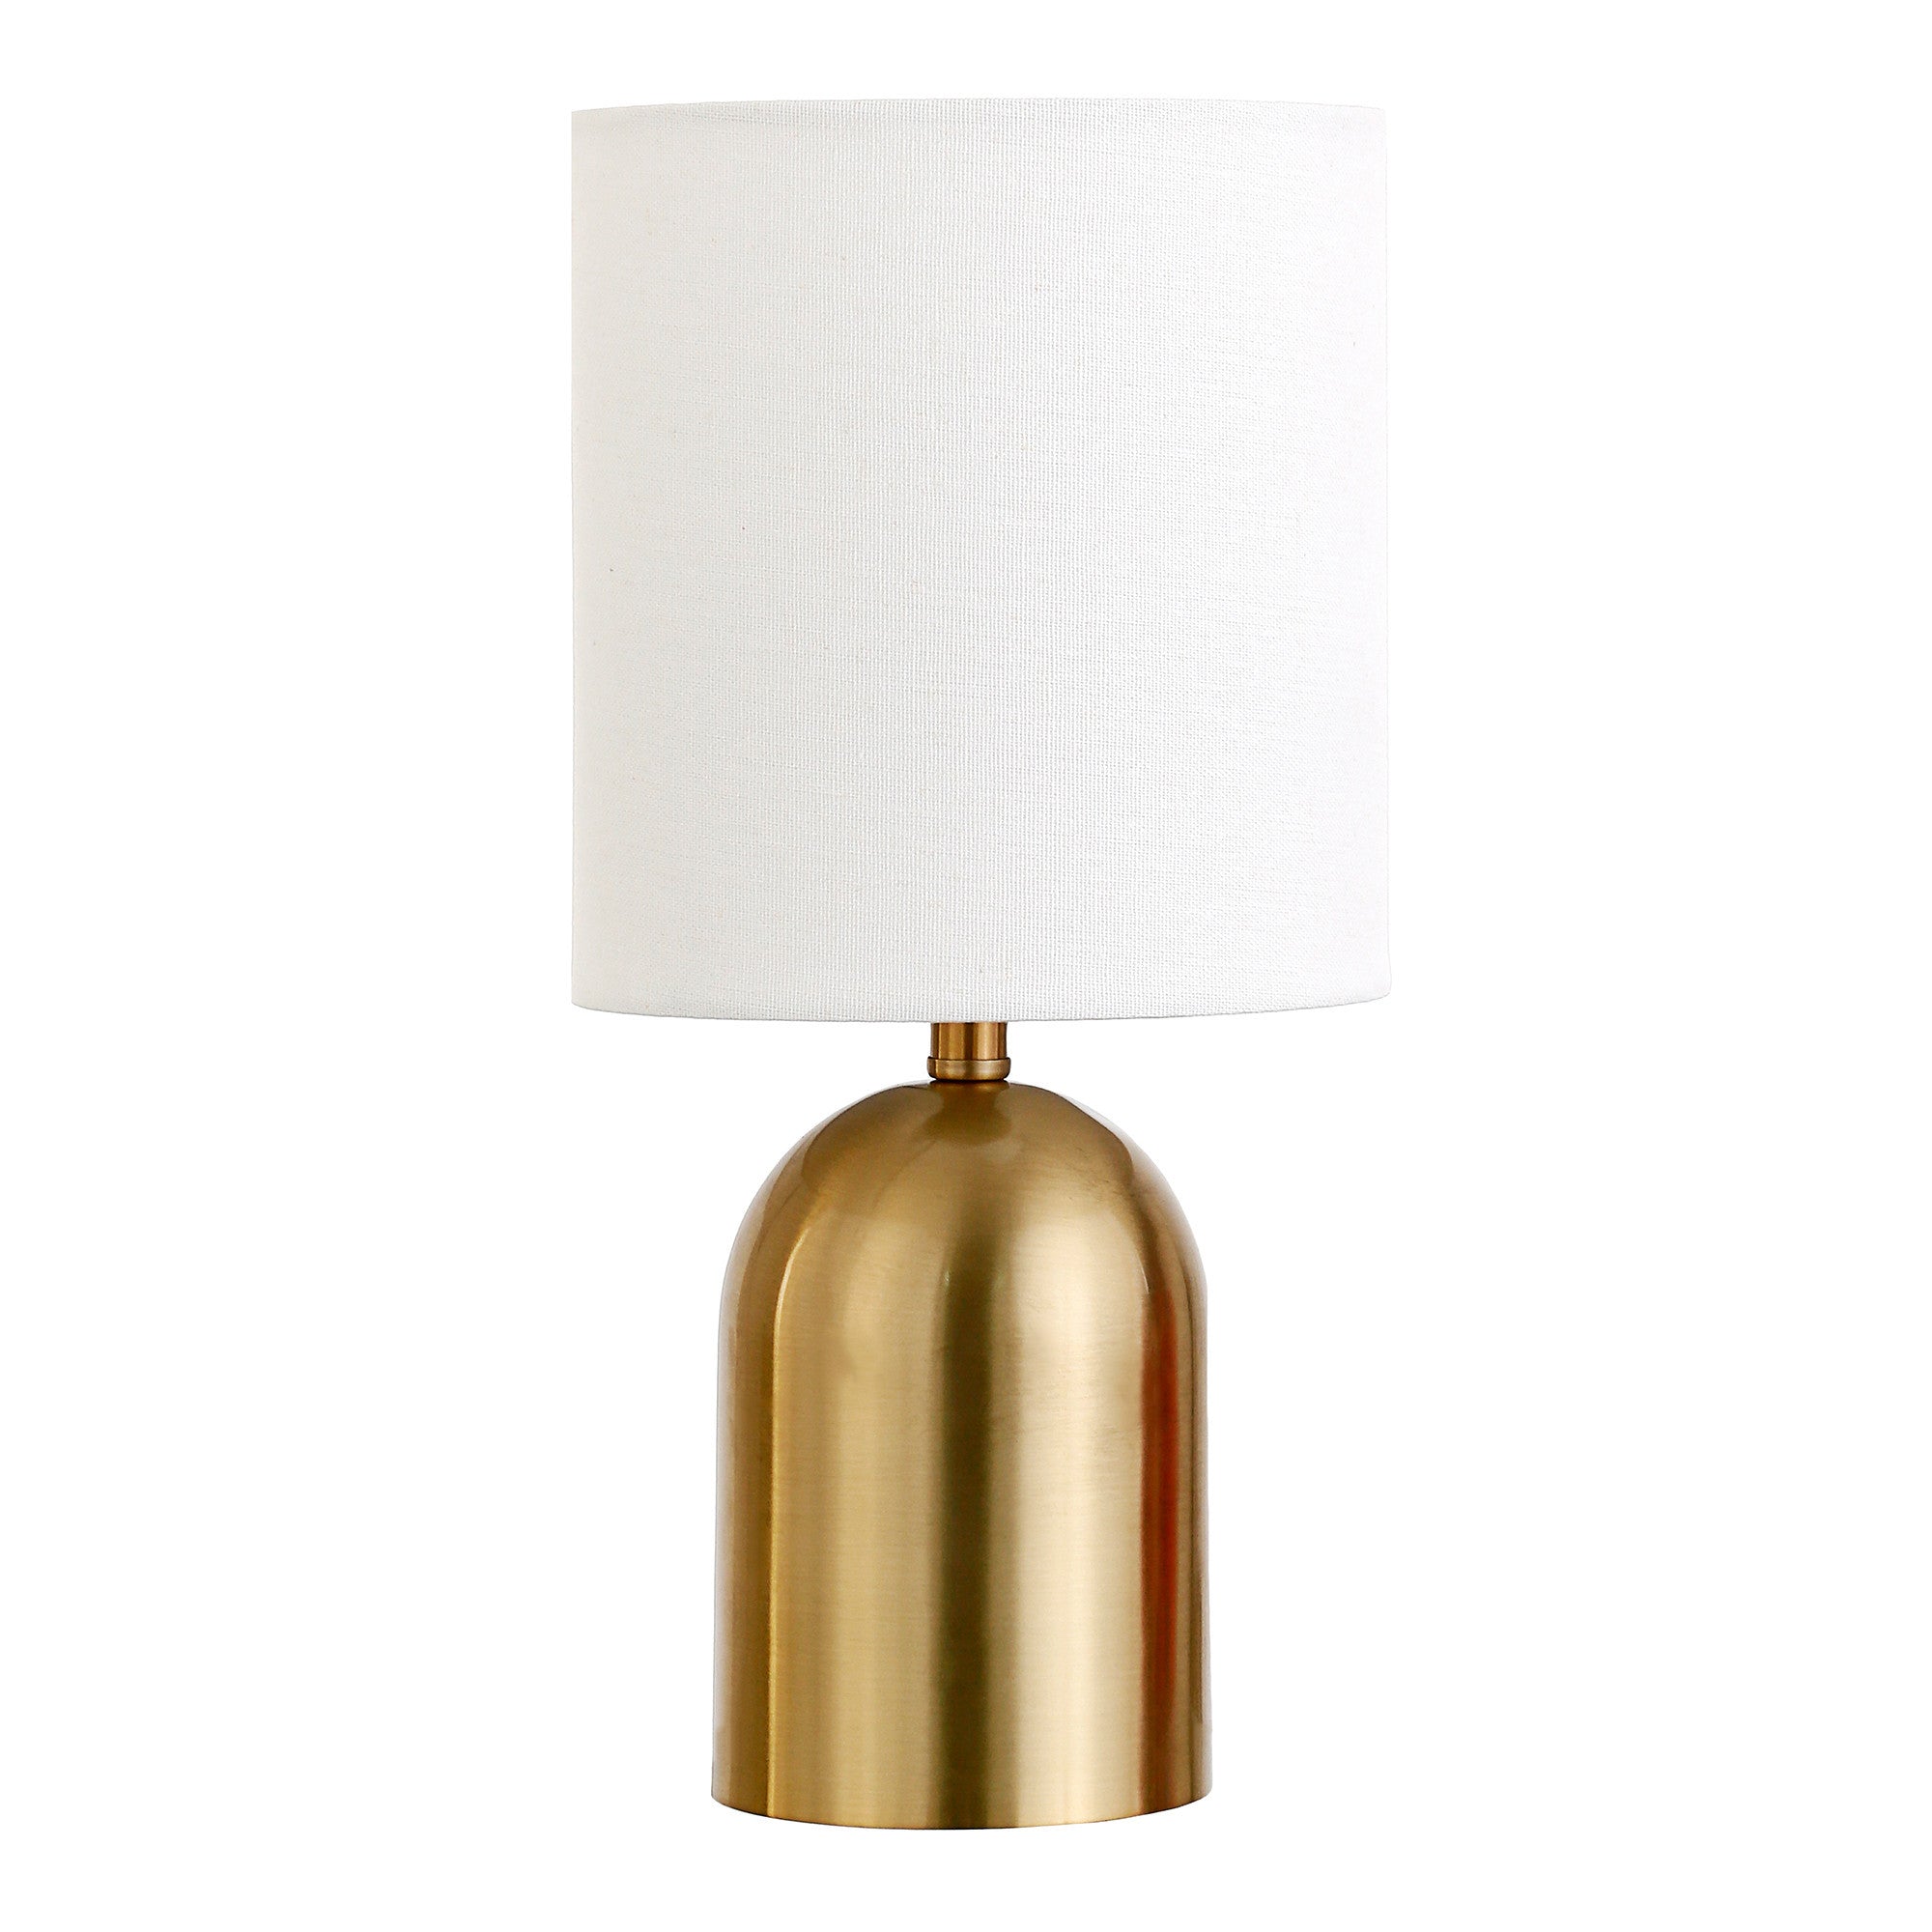 13" Gold Metal Cylinder Table Lamp With White Drum Shade